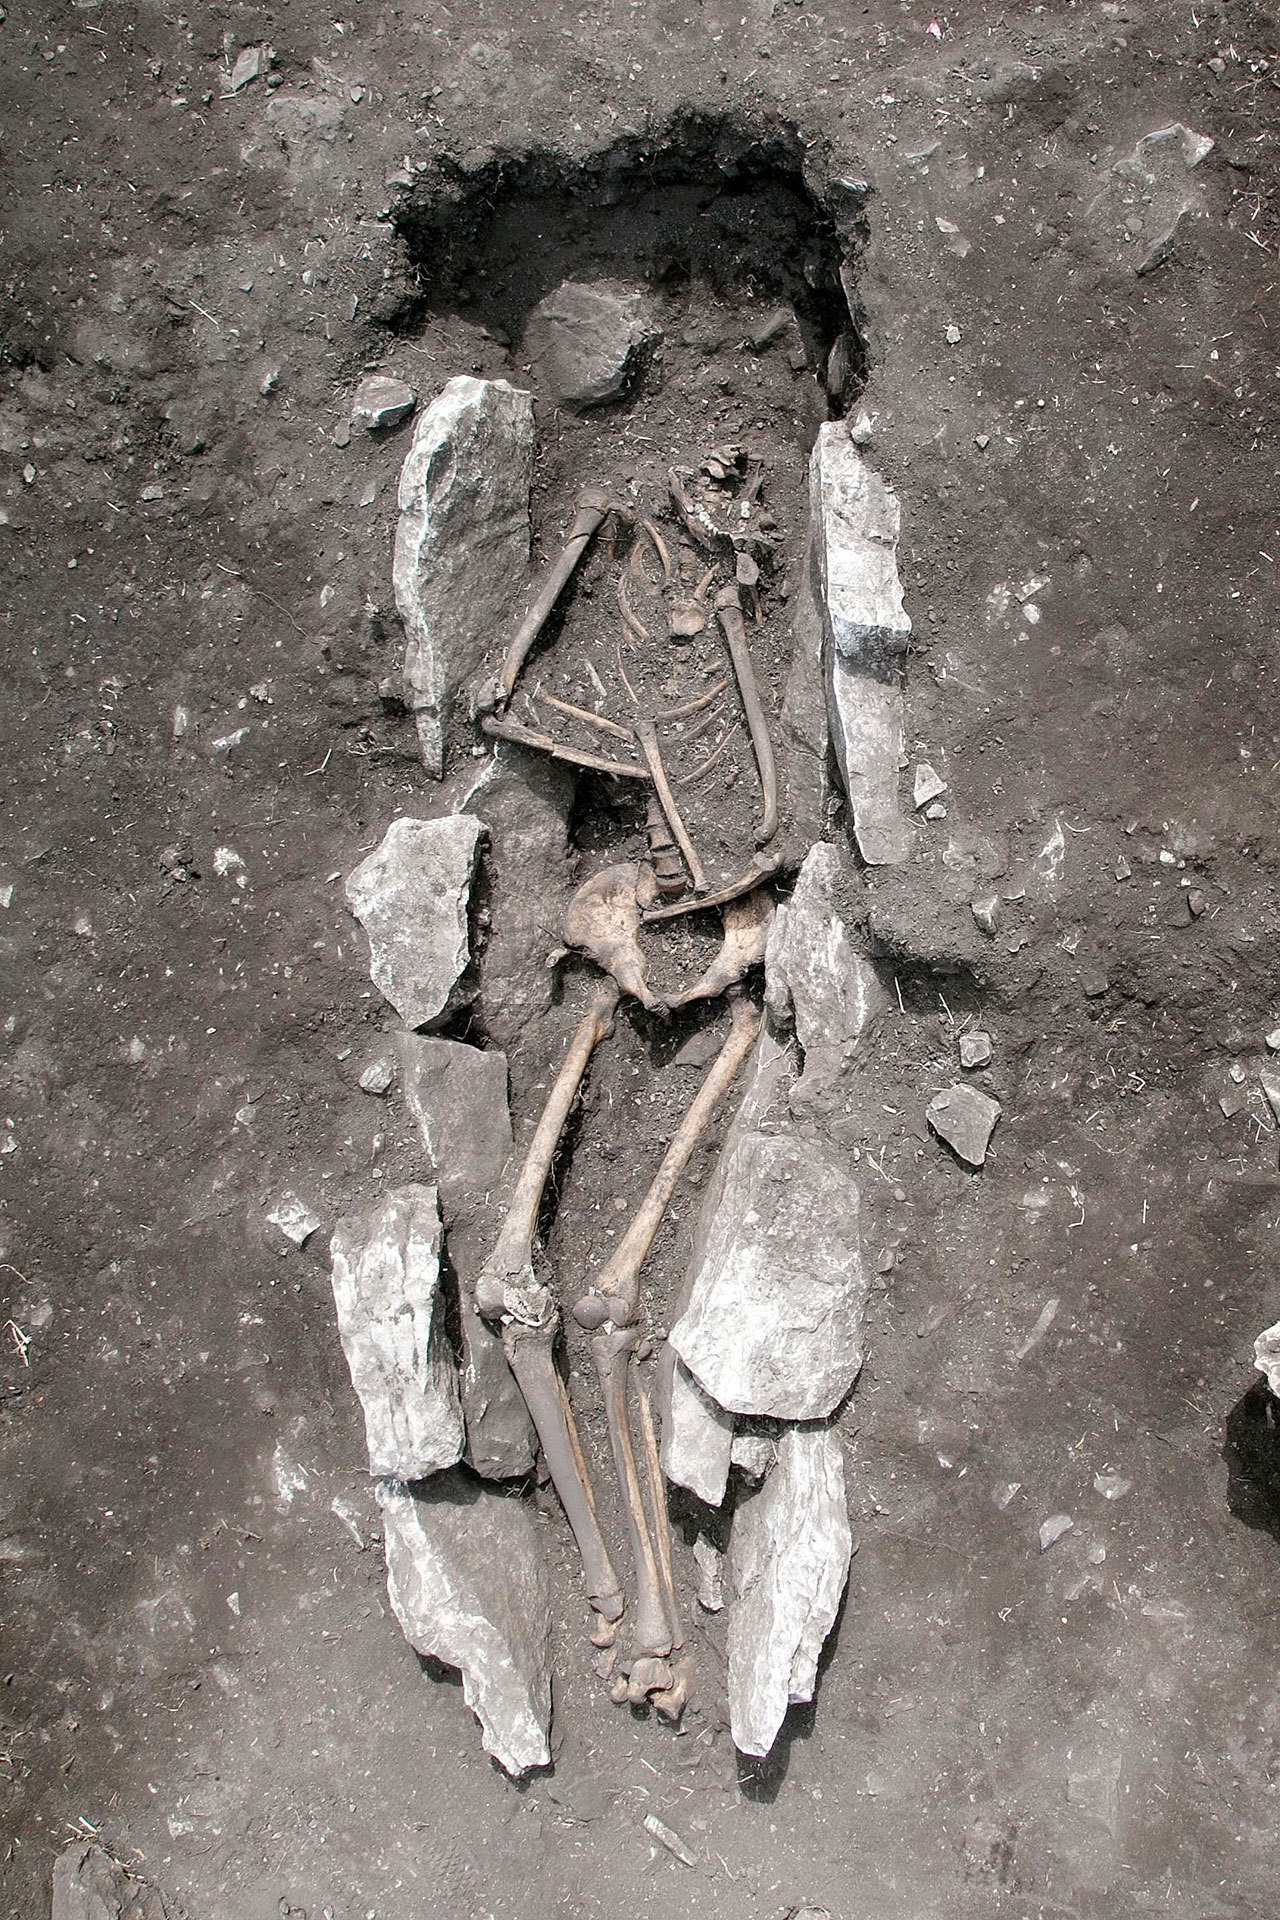 An 11th century B.C. skeleton of a teenager excavated at Mount Lykaion in the southern Peloponnese region of Greece, the mountaintop sanctuary of Zeus, king of the ancient Greek gods. (Greek Culture Ministry)